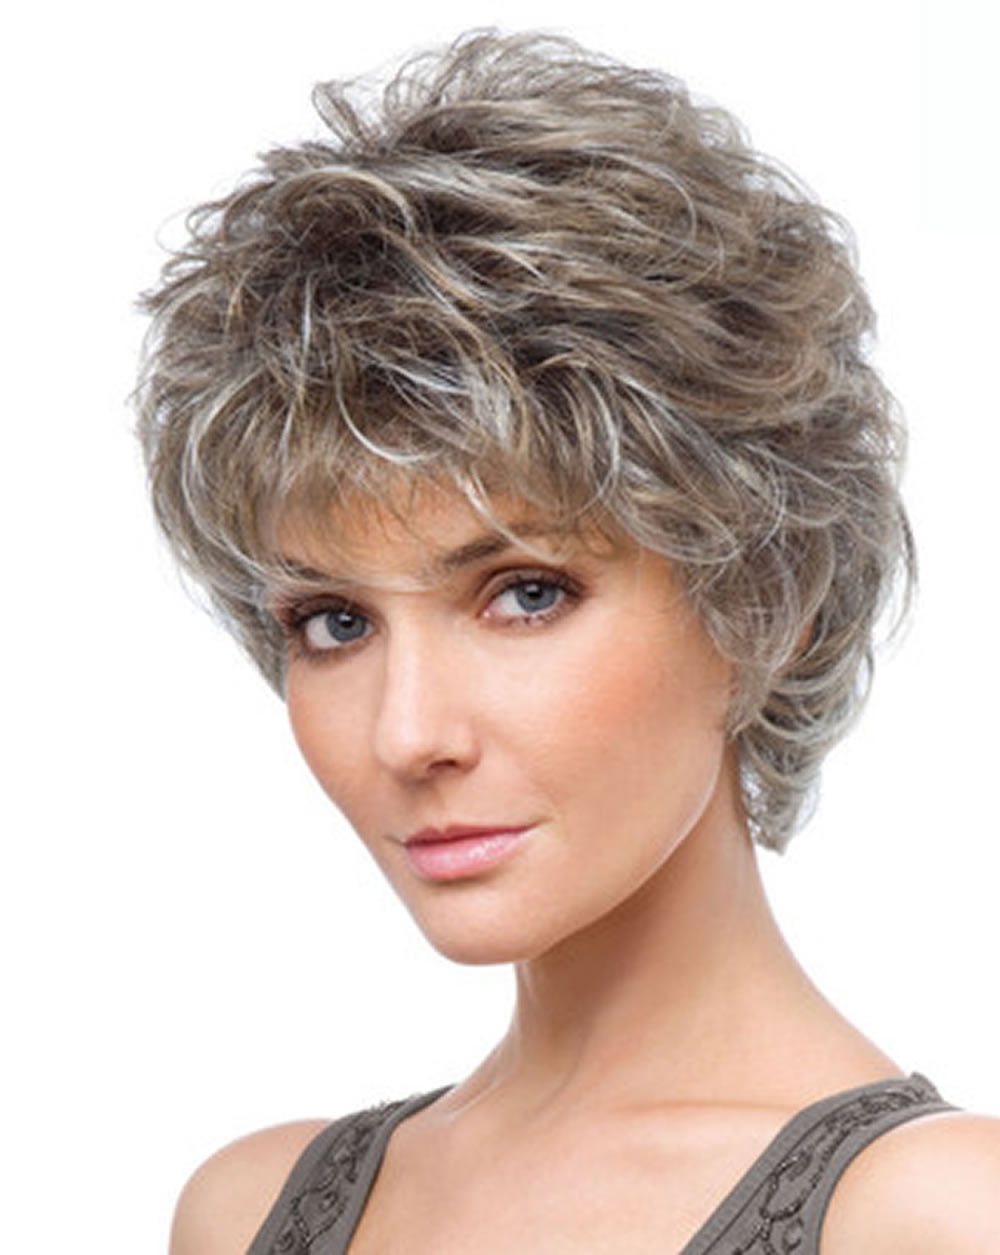 30 Easy Short Hairstyles for Older Women – You Should Try ...